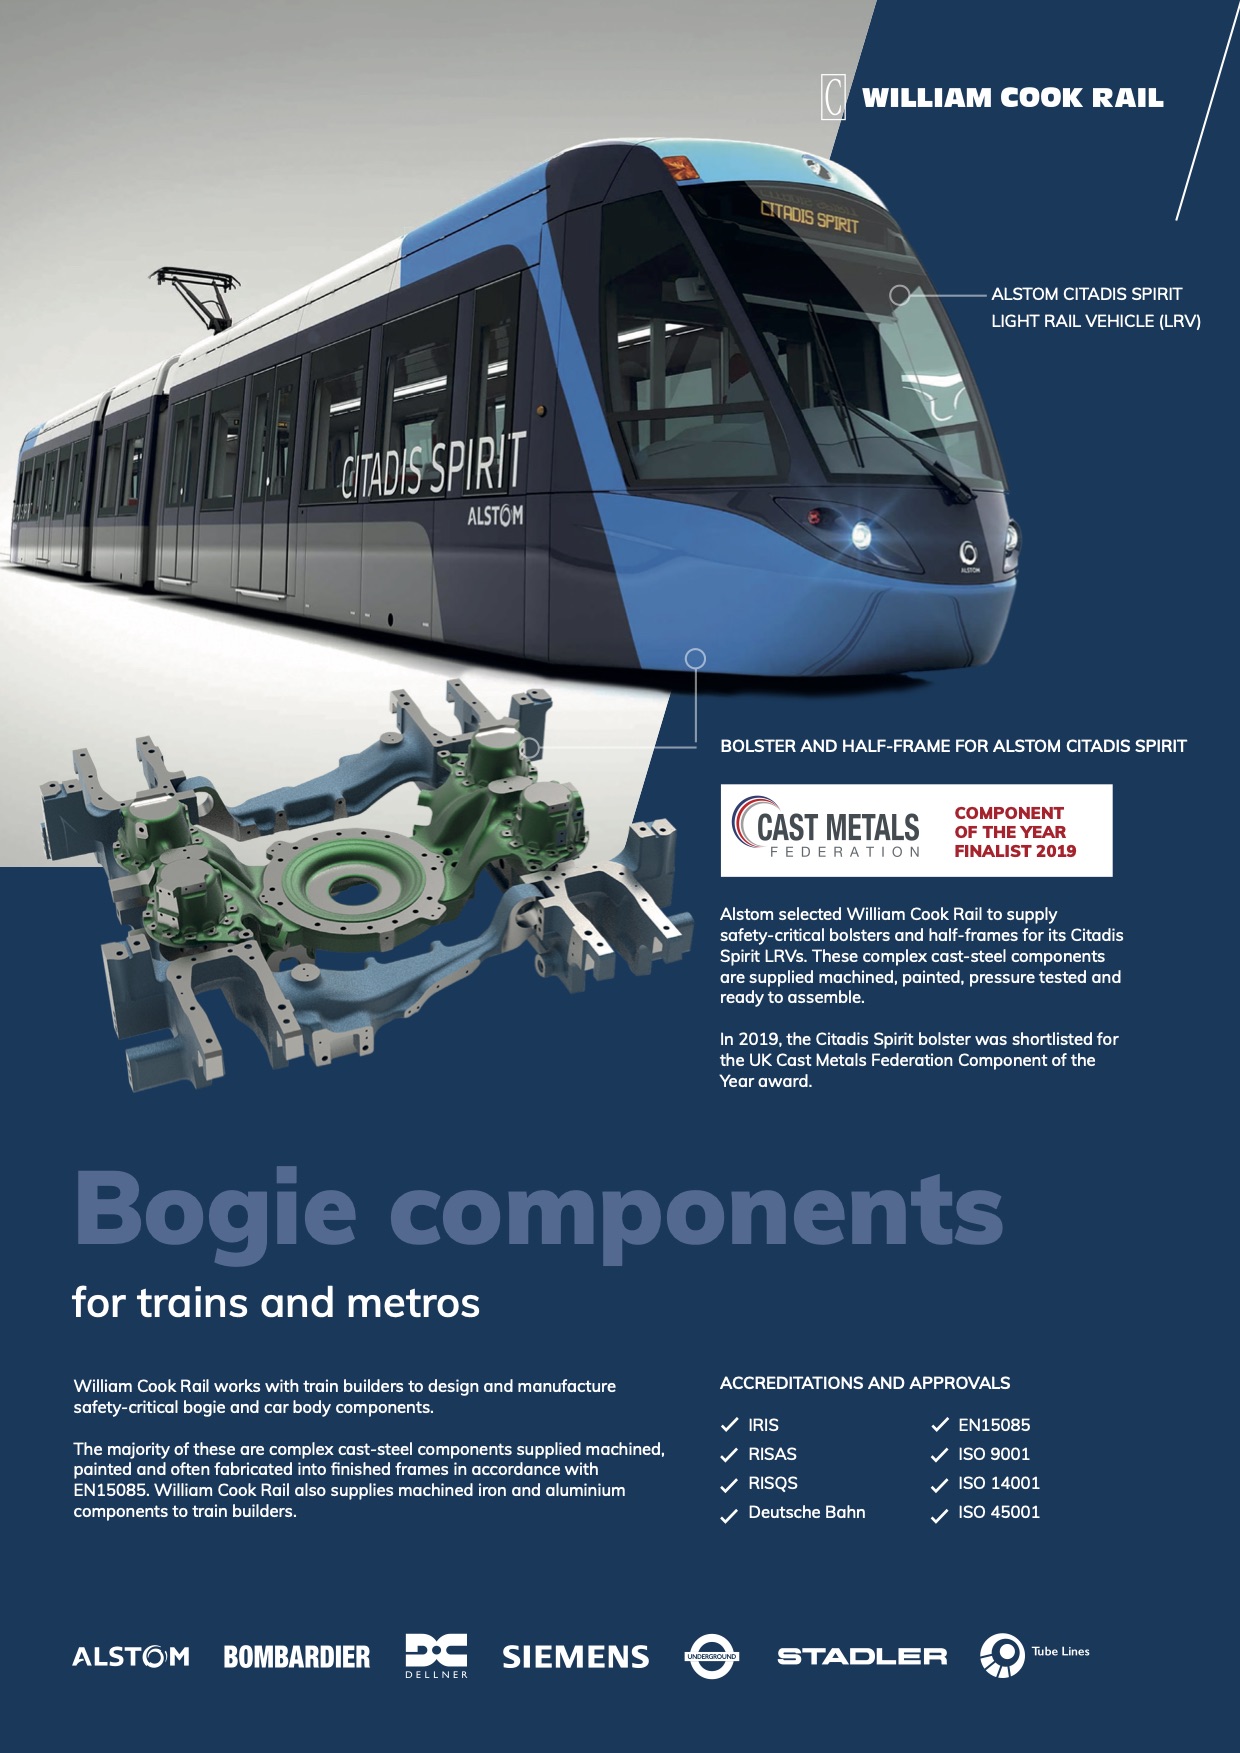 Bogie components for trains and metros